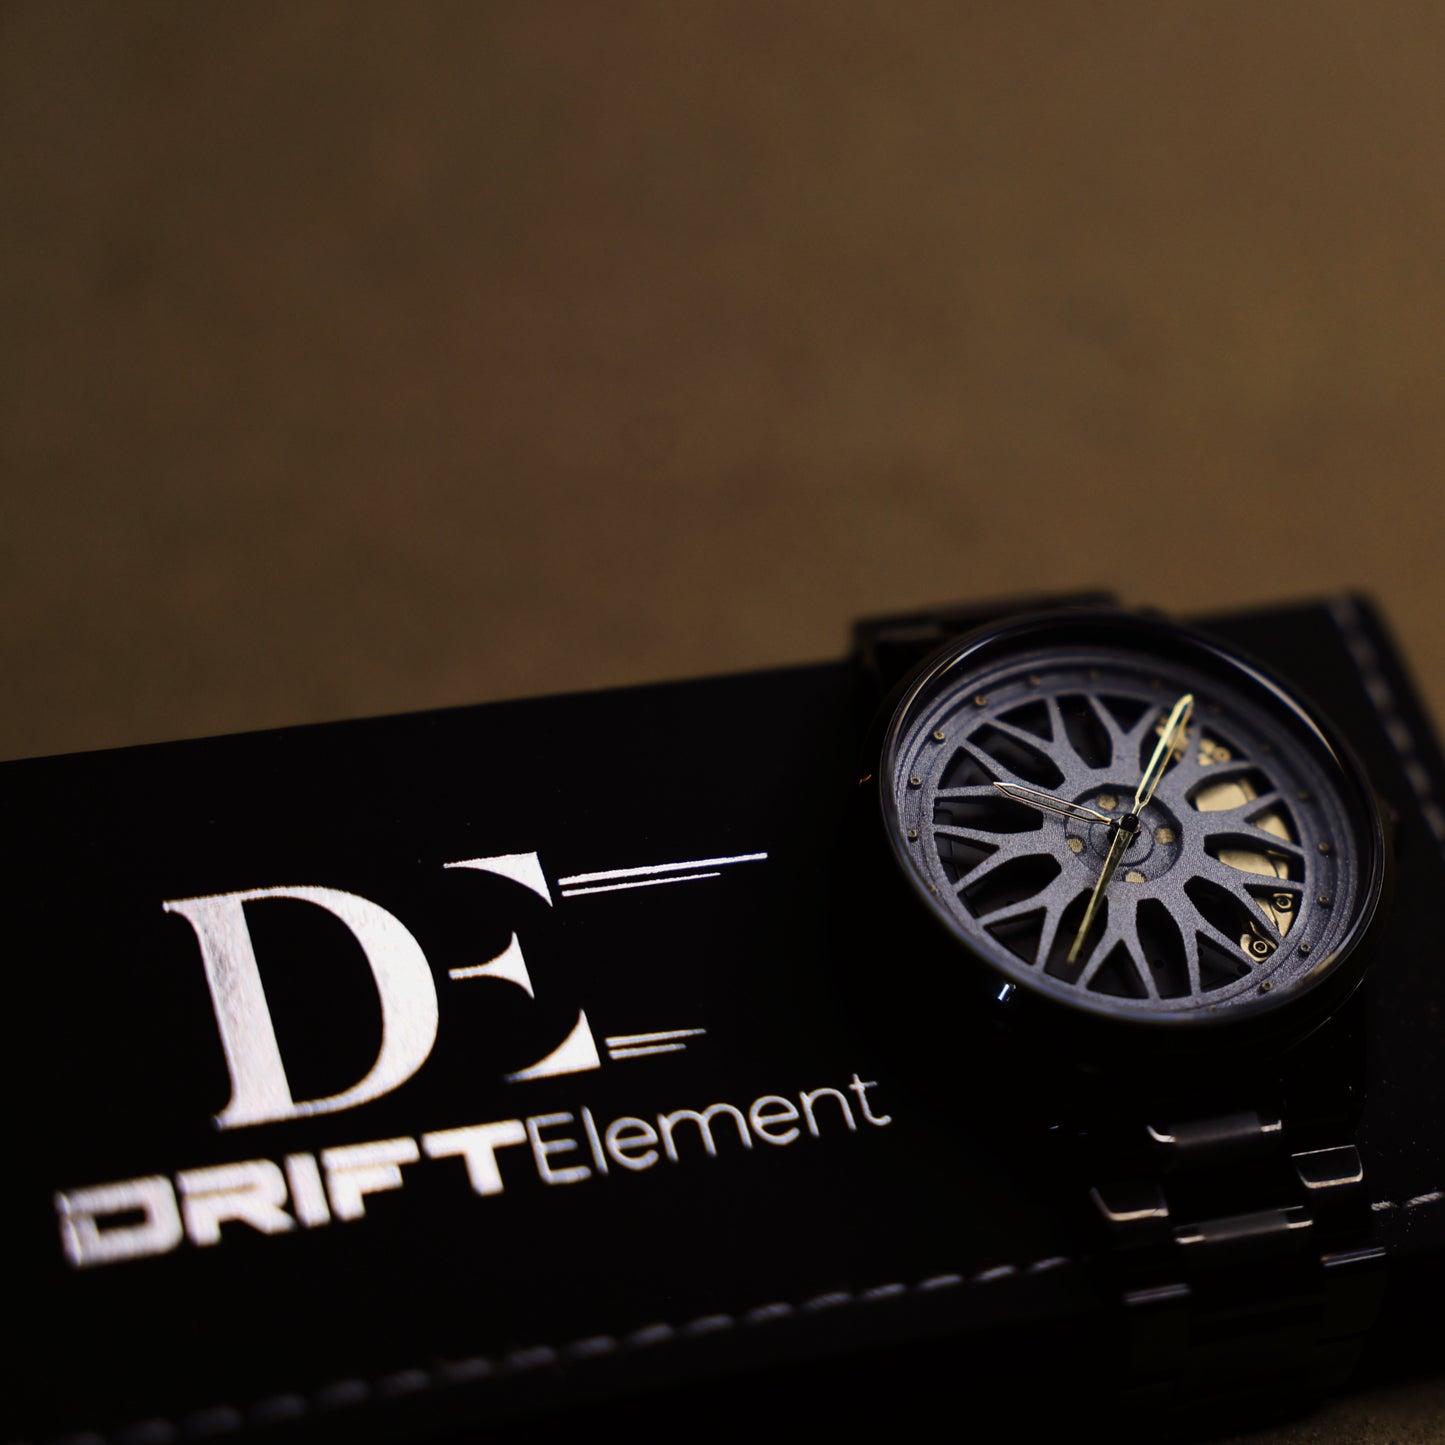 Image featuring the Final Edition watch by DriftElement, resting elegantly against its branded box. The watch showcases a unique, innovative rim design, highlighting the German startup's dedication to crafting timepieces with an automotive-inspired aesthetic.